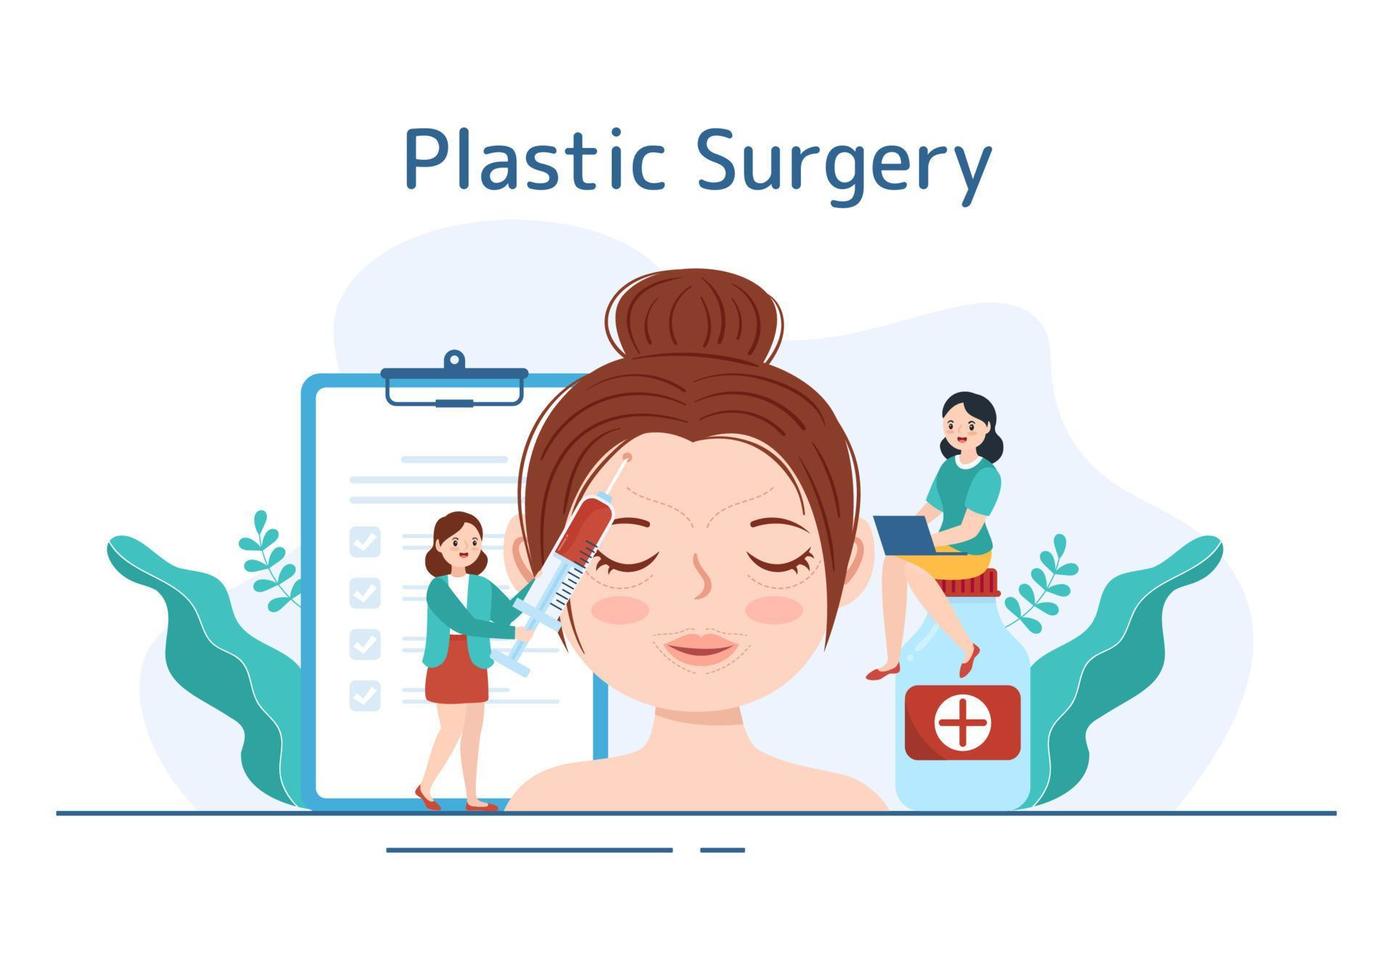 Plastic Surgery Flat Cartoon Hand Drawn Templates Illustration of Medical Surgical Operation on the Body or Face as Expected using Advanced Equipment vector